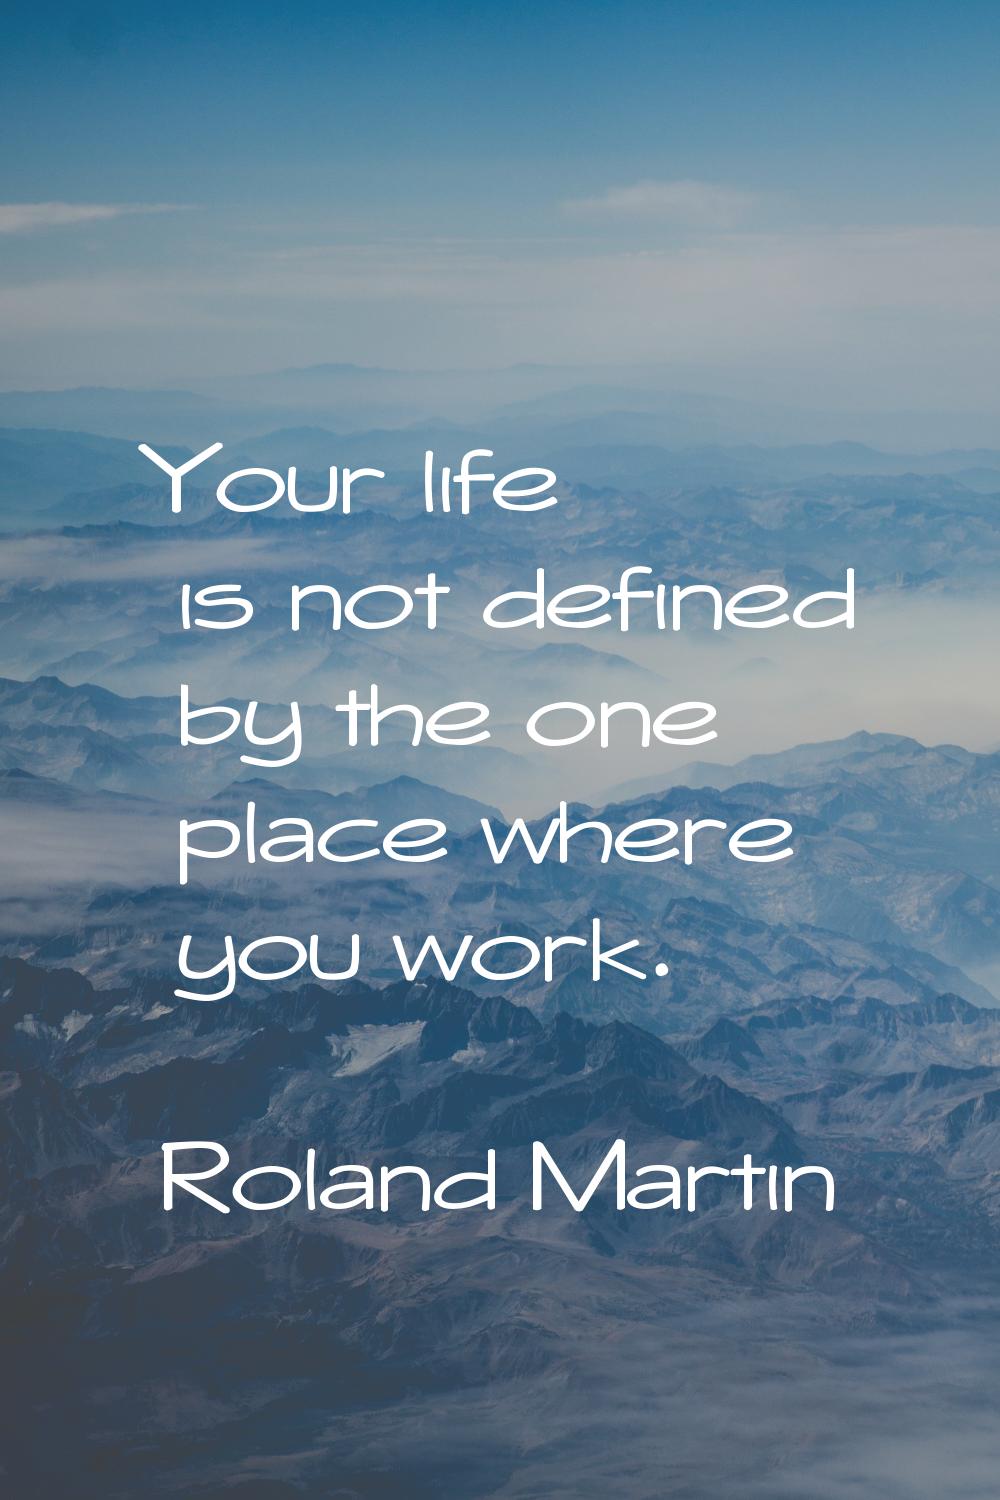 Your life is not defined by the one place where you work.